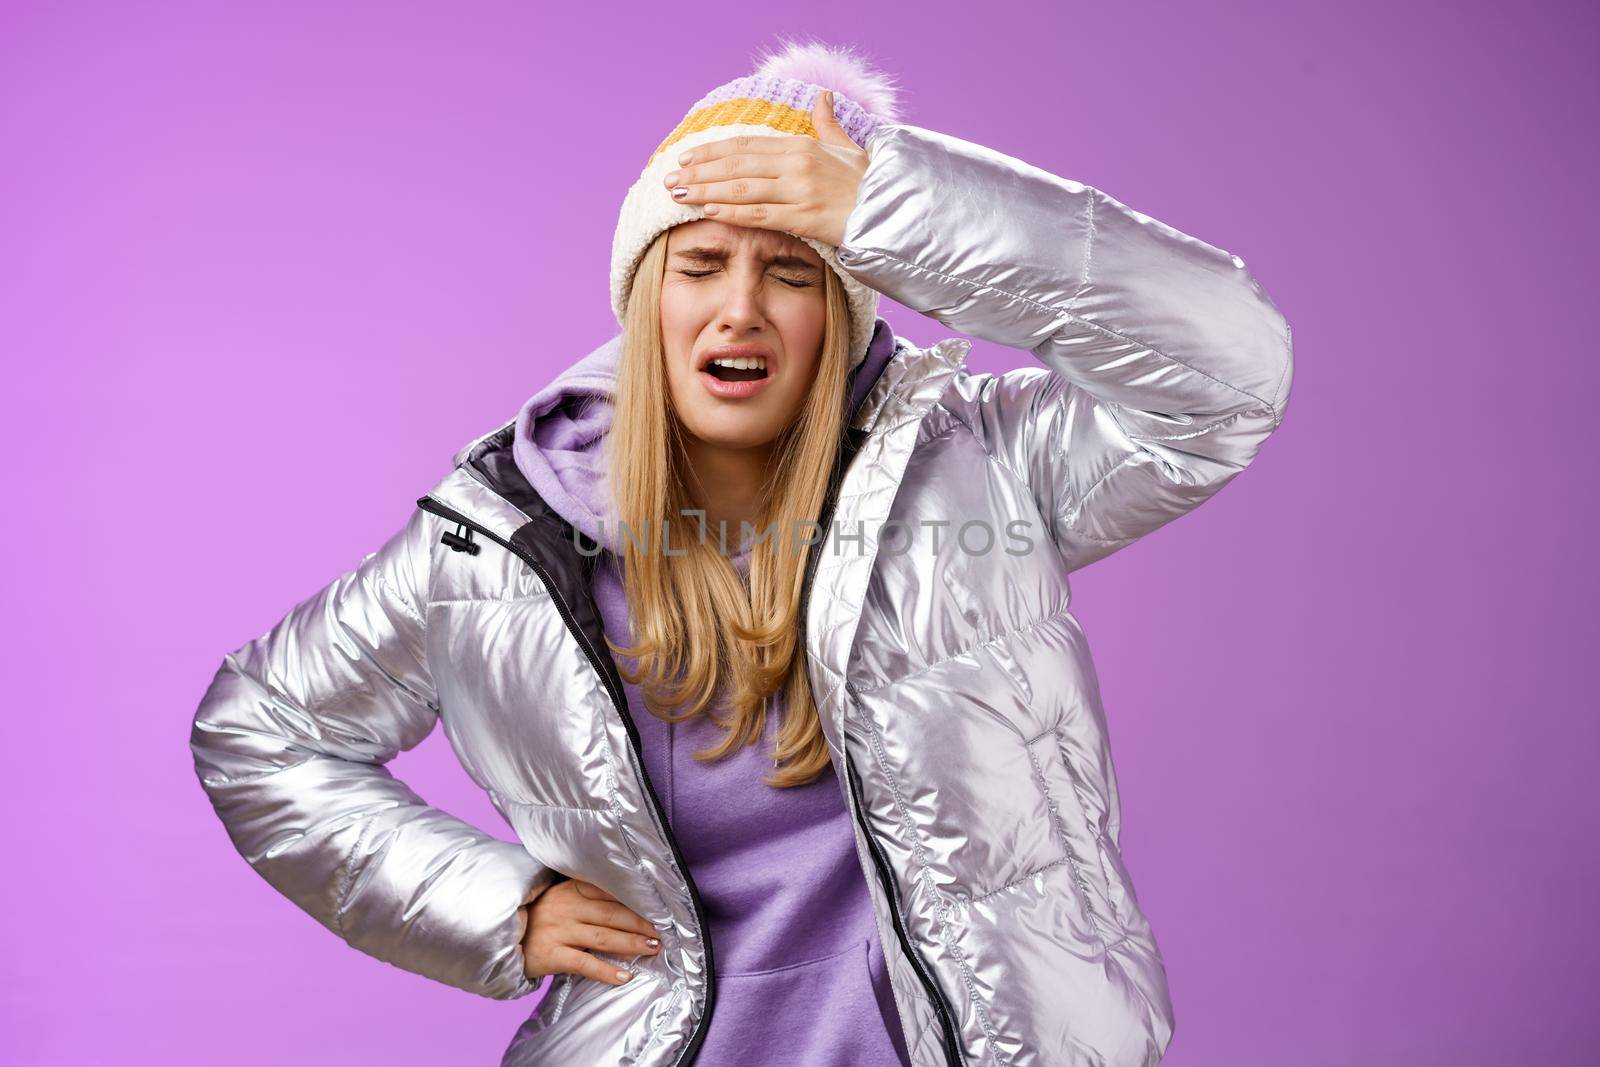 Girl sick tired touch forehead painful feeling grimacing complaining boyfriend shot snowball woman face standing bothered fed up and upset, whining displeased suffering headache, purple background.